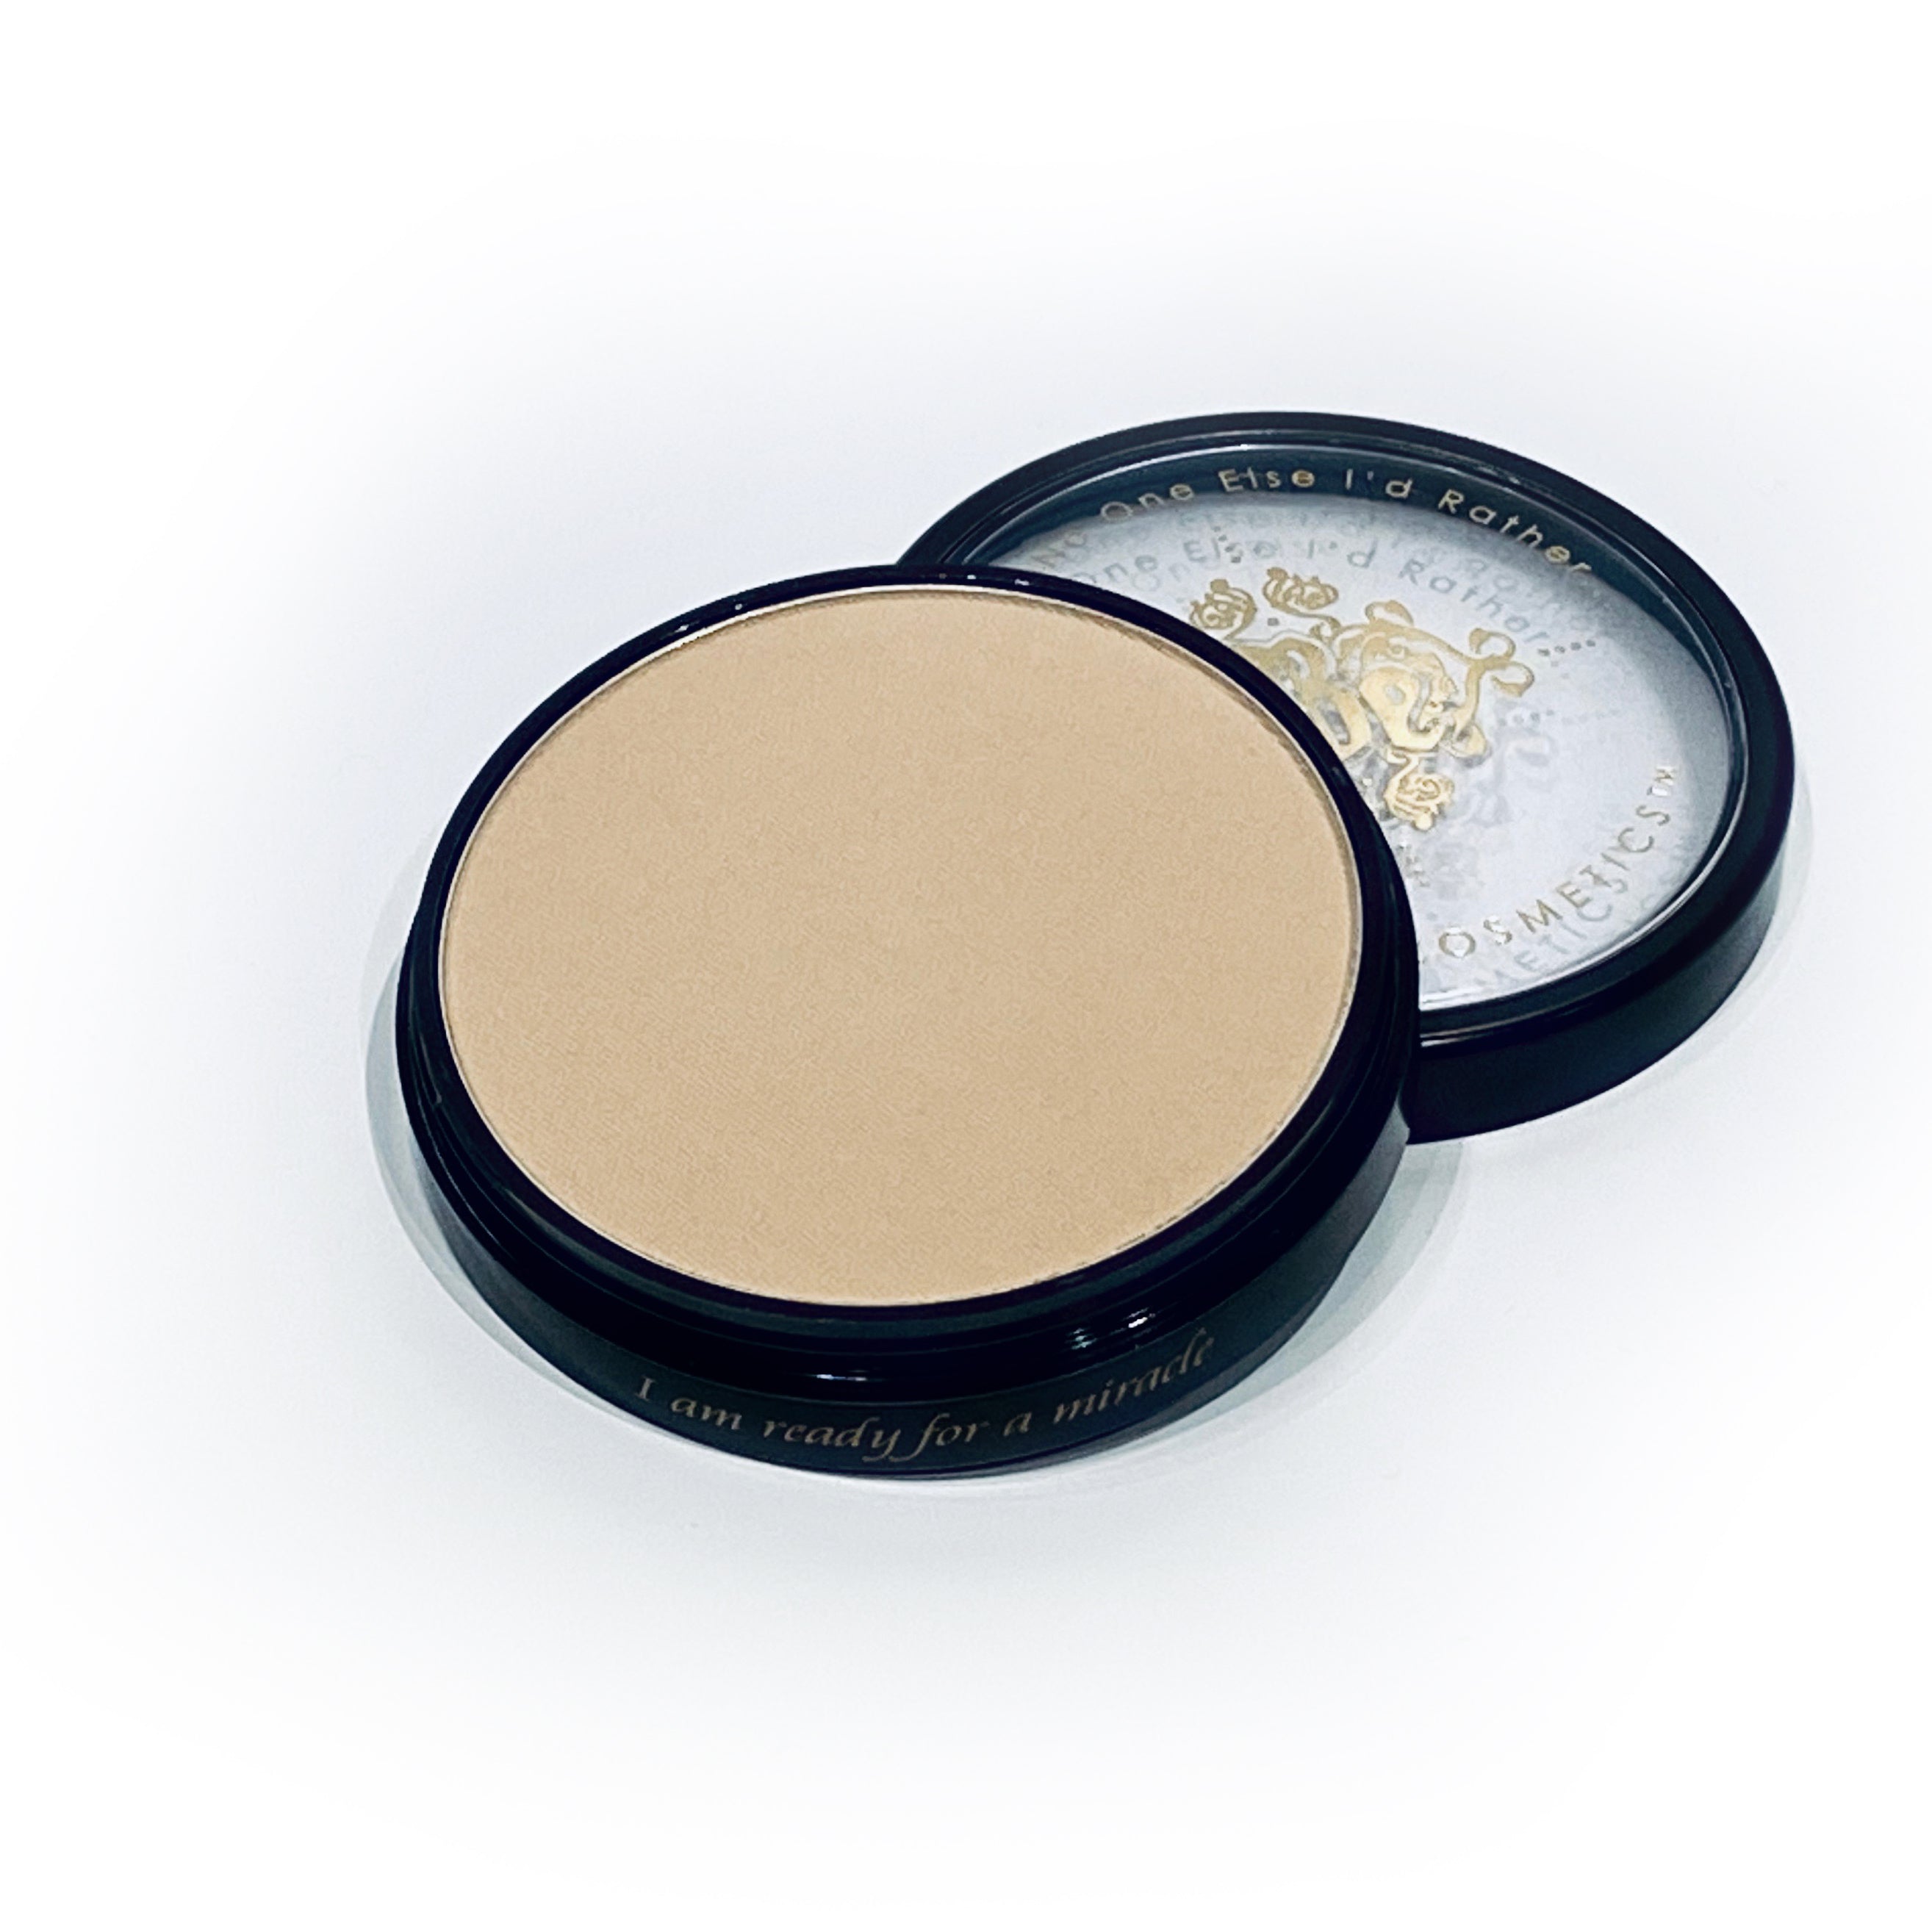 Cat Call Pressed Powder in Beige (Med-light) Stack (Most Popular)